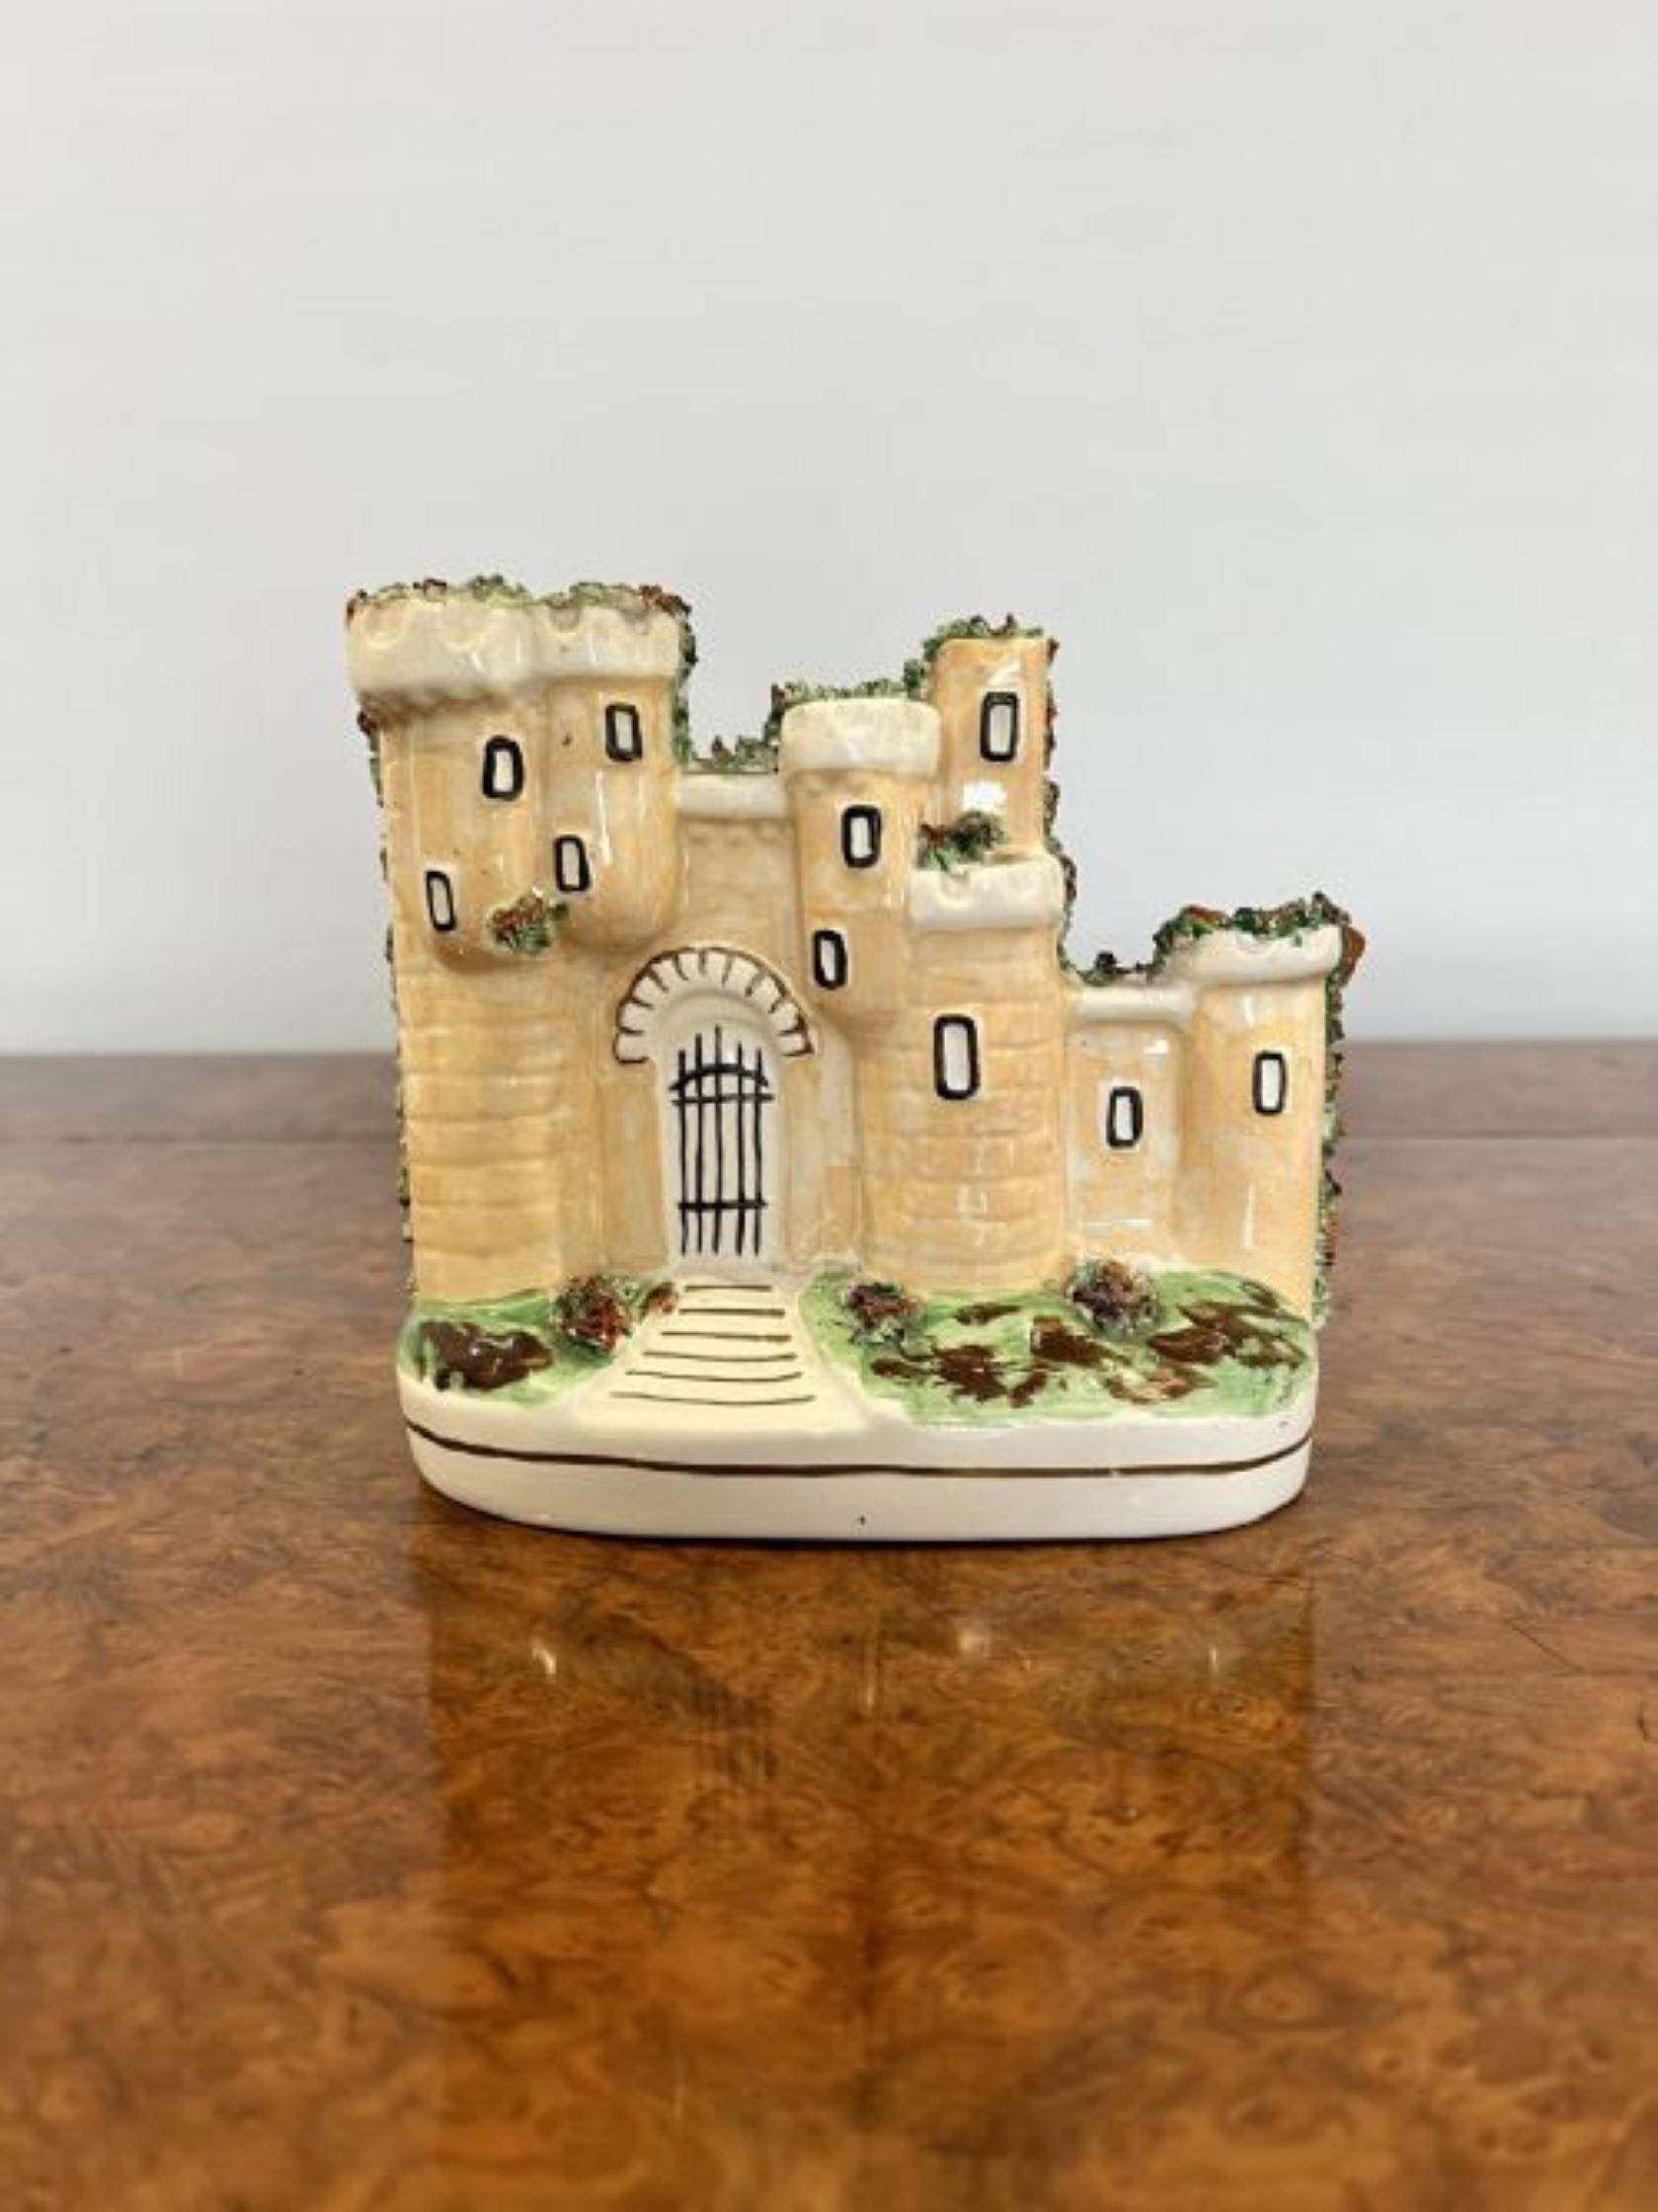 Quality antique Staffordshire flat back castle having a quality antique Victorian Staffordshire figure of a castle hand painted in wonderful brown, green, white and black colours with windows, a front gate and foliage raised on a oval base. 